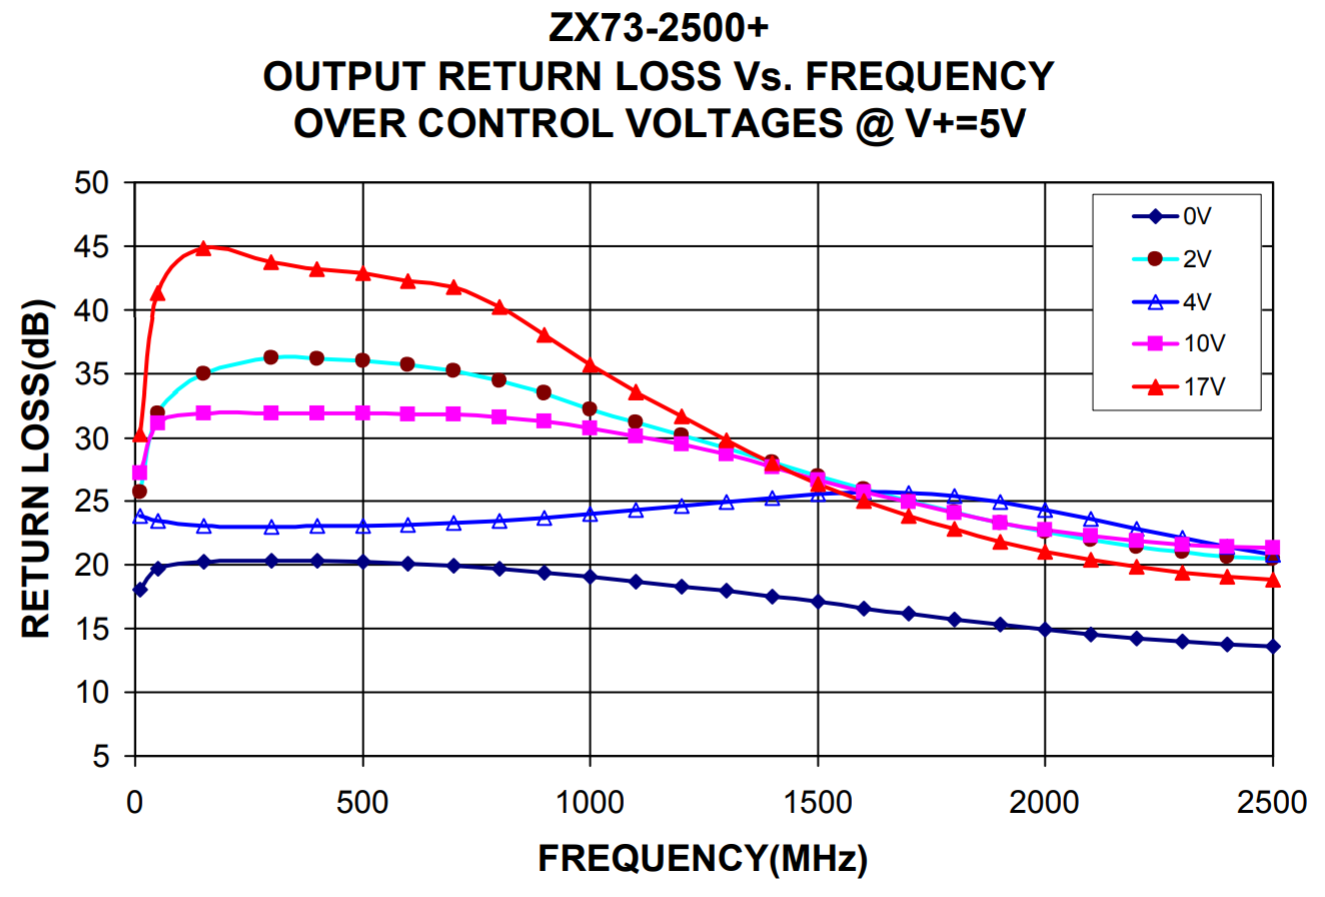 OUTPUT RETURN LOSS Vs. FREQUENCY